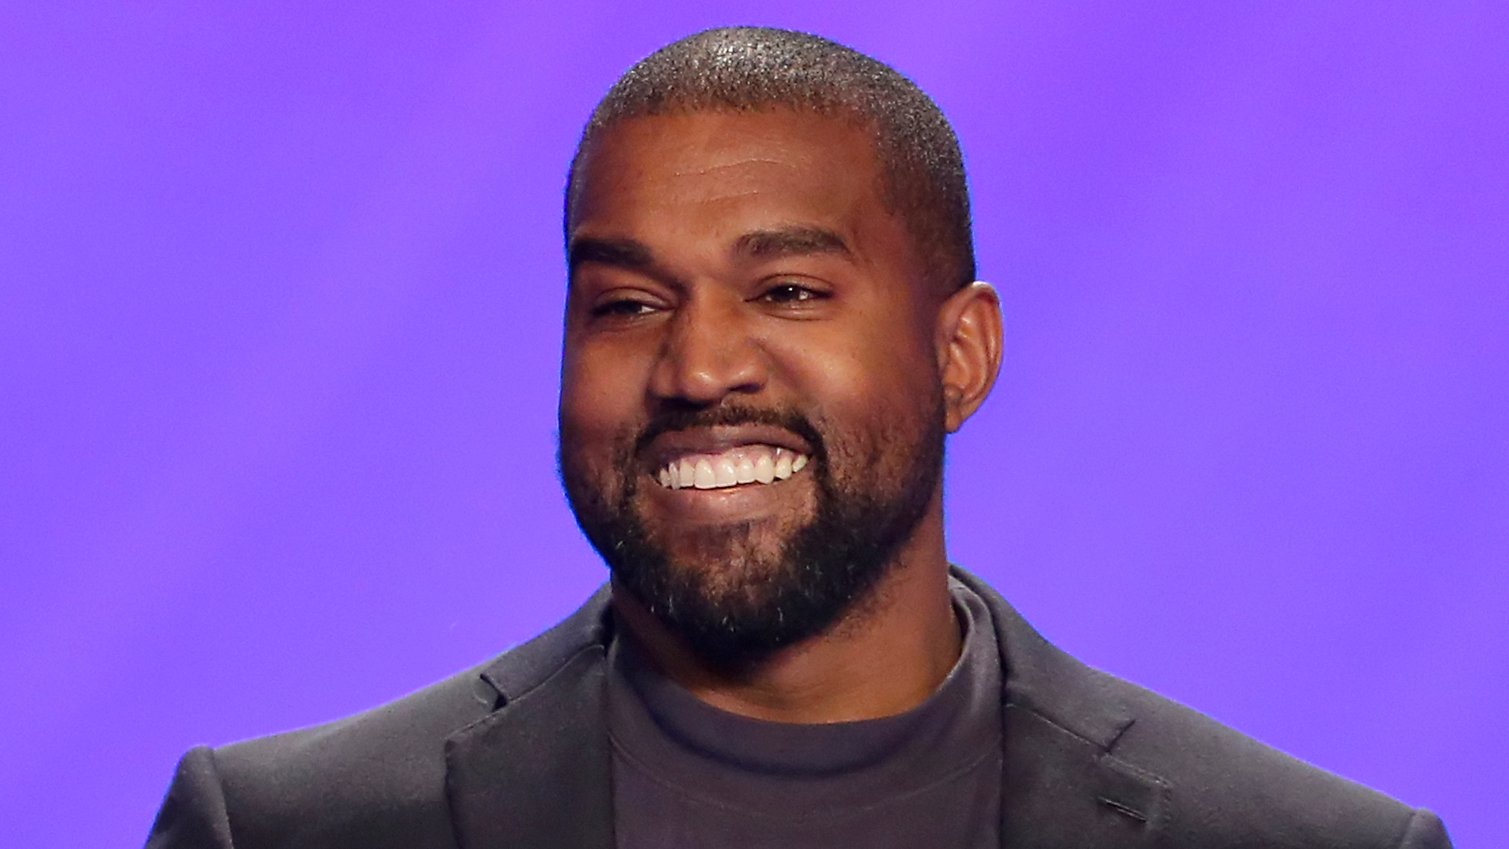 judge-bars-rapper-kanye-west-from-appearing-on-arizona’s-ballot